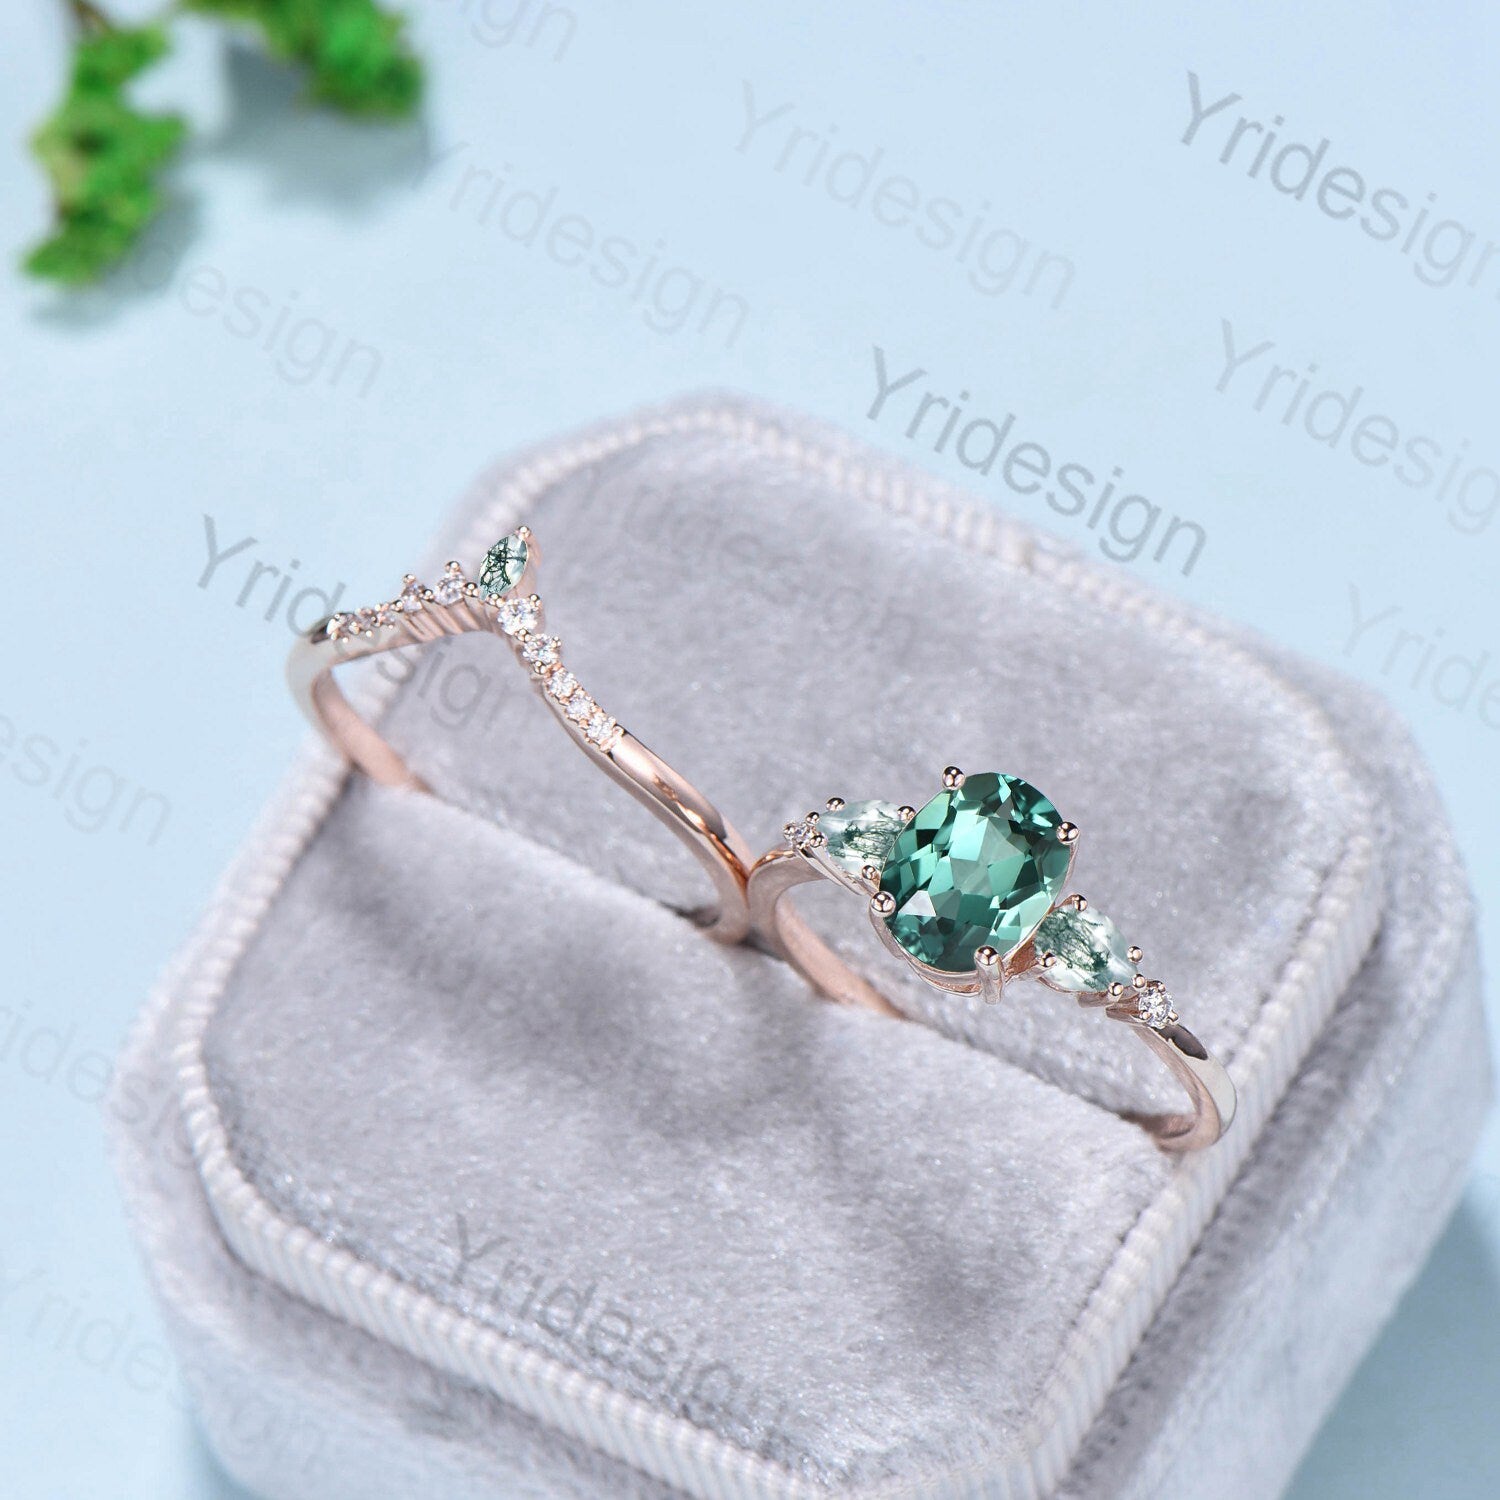 Unique 1.5Ct Oval Green Sapphire Engagement Ring Set Five Stone Pear Moss Agate Wedding Set for Women Vintage Teal Sapphire Bridal Ring Set - PENFINE